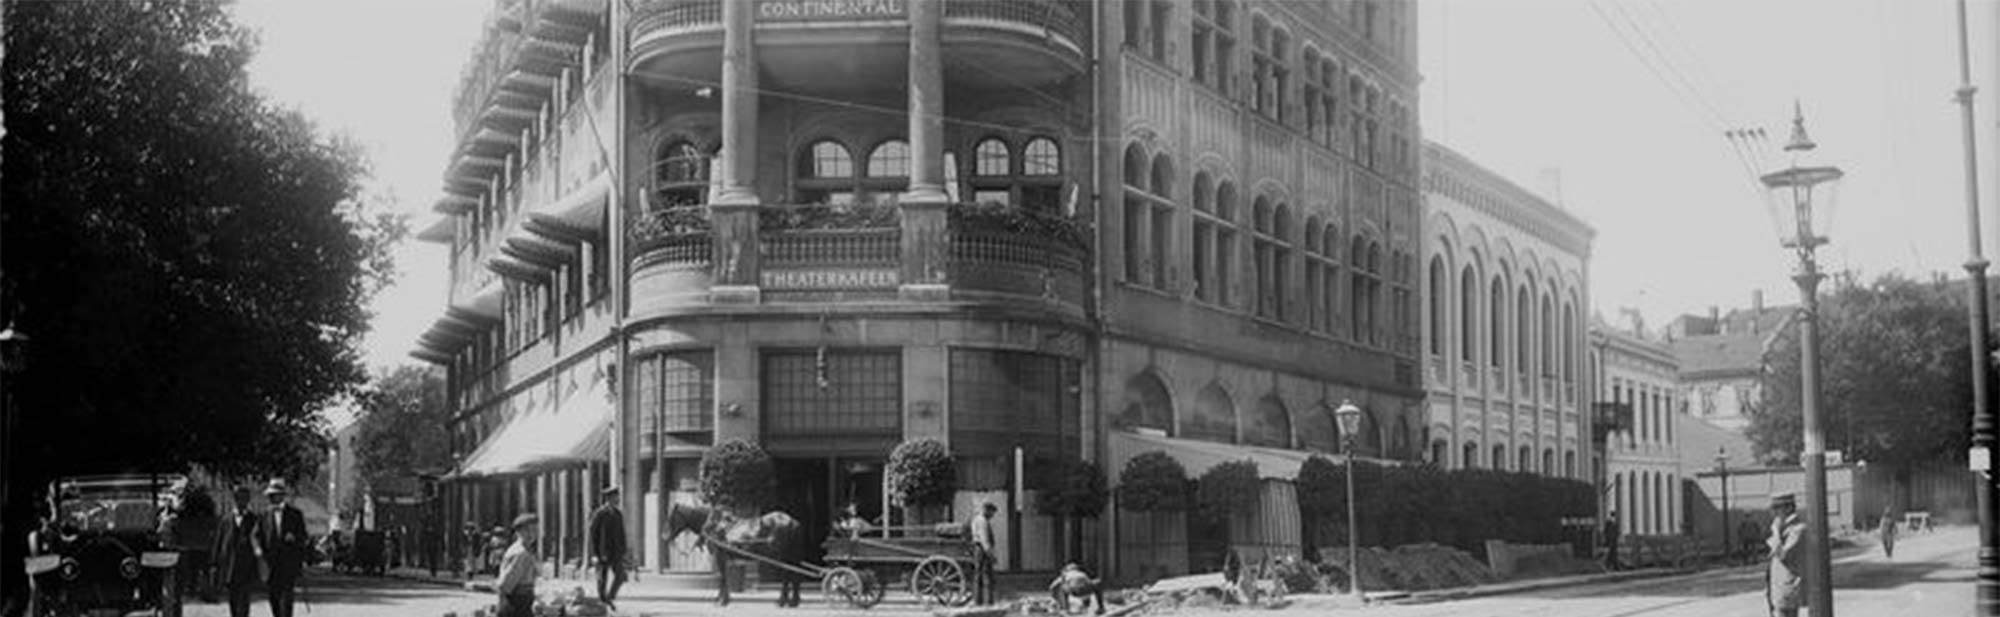 History of Hotel Continental